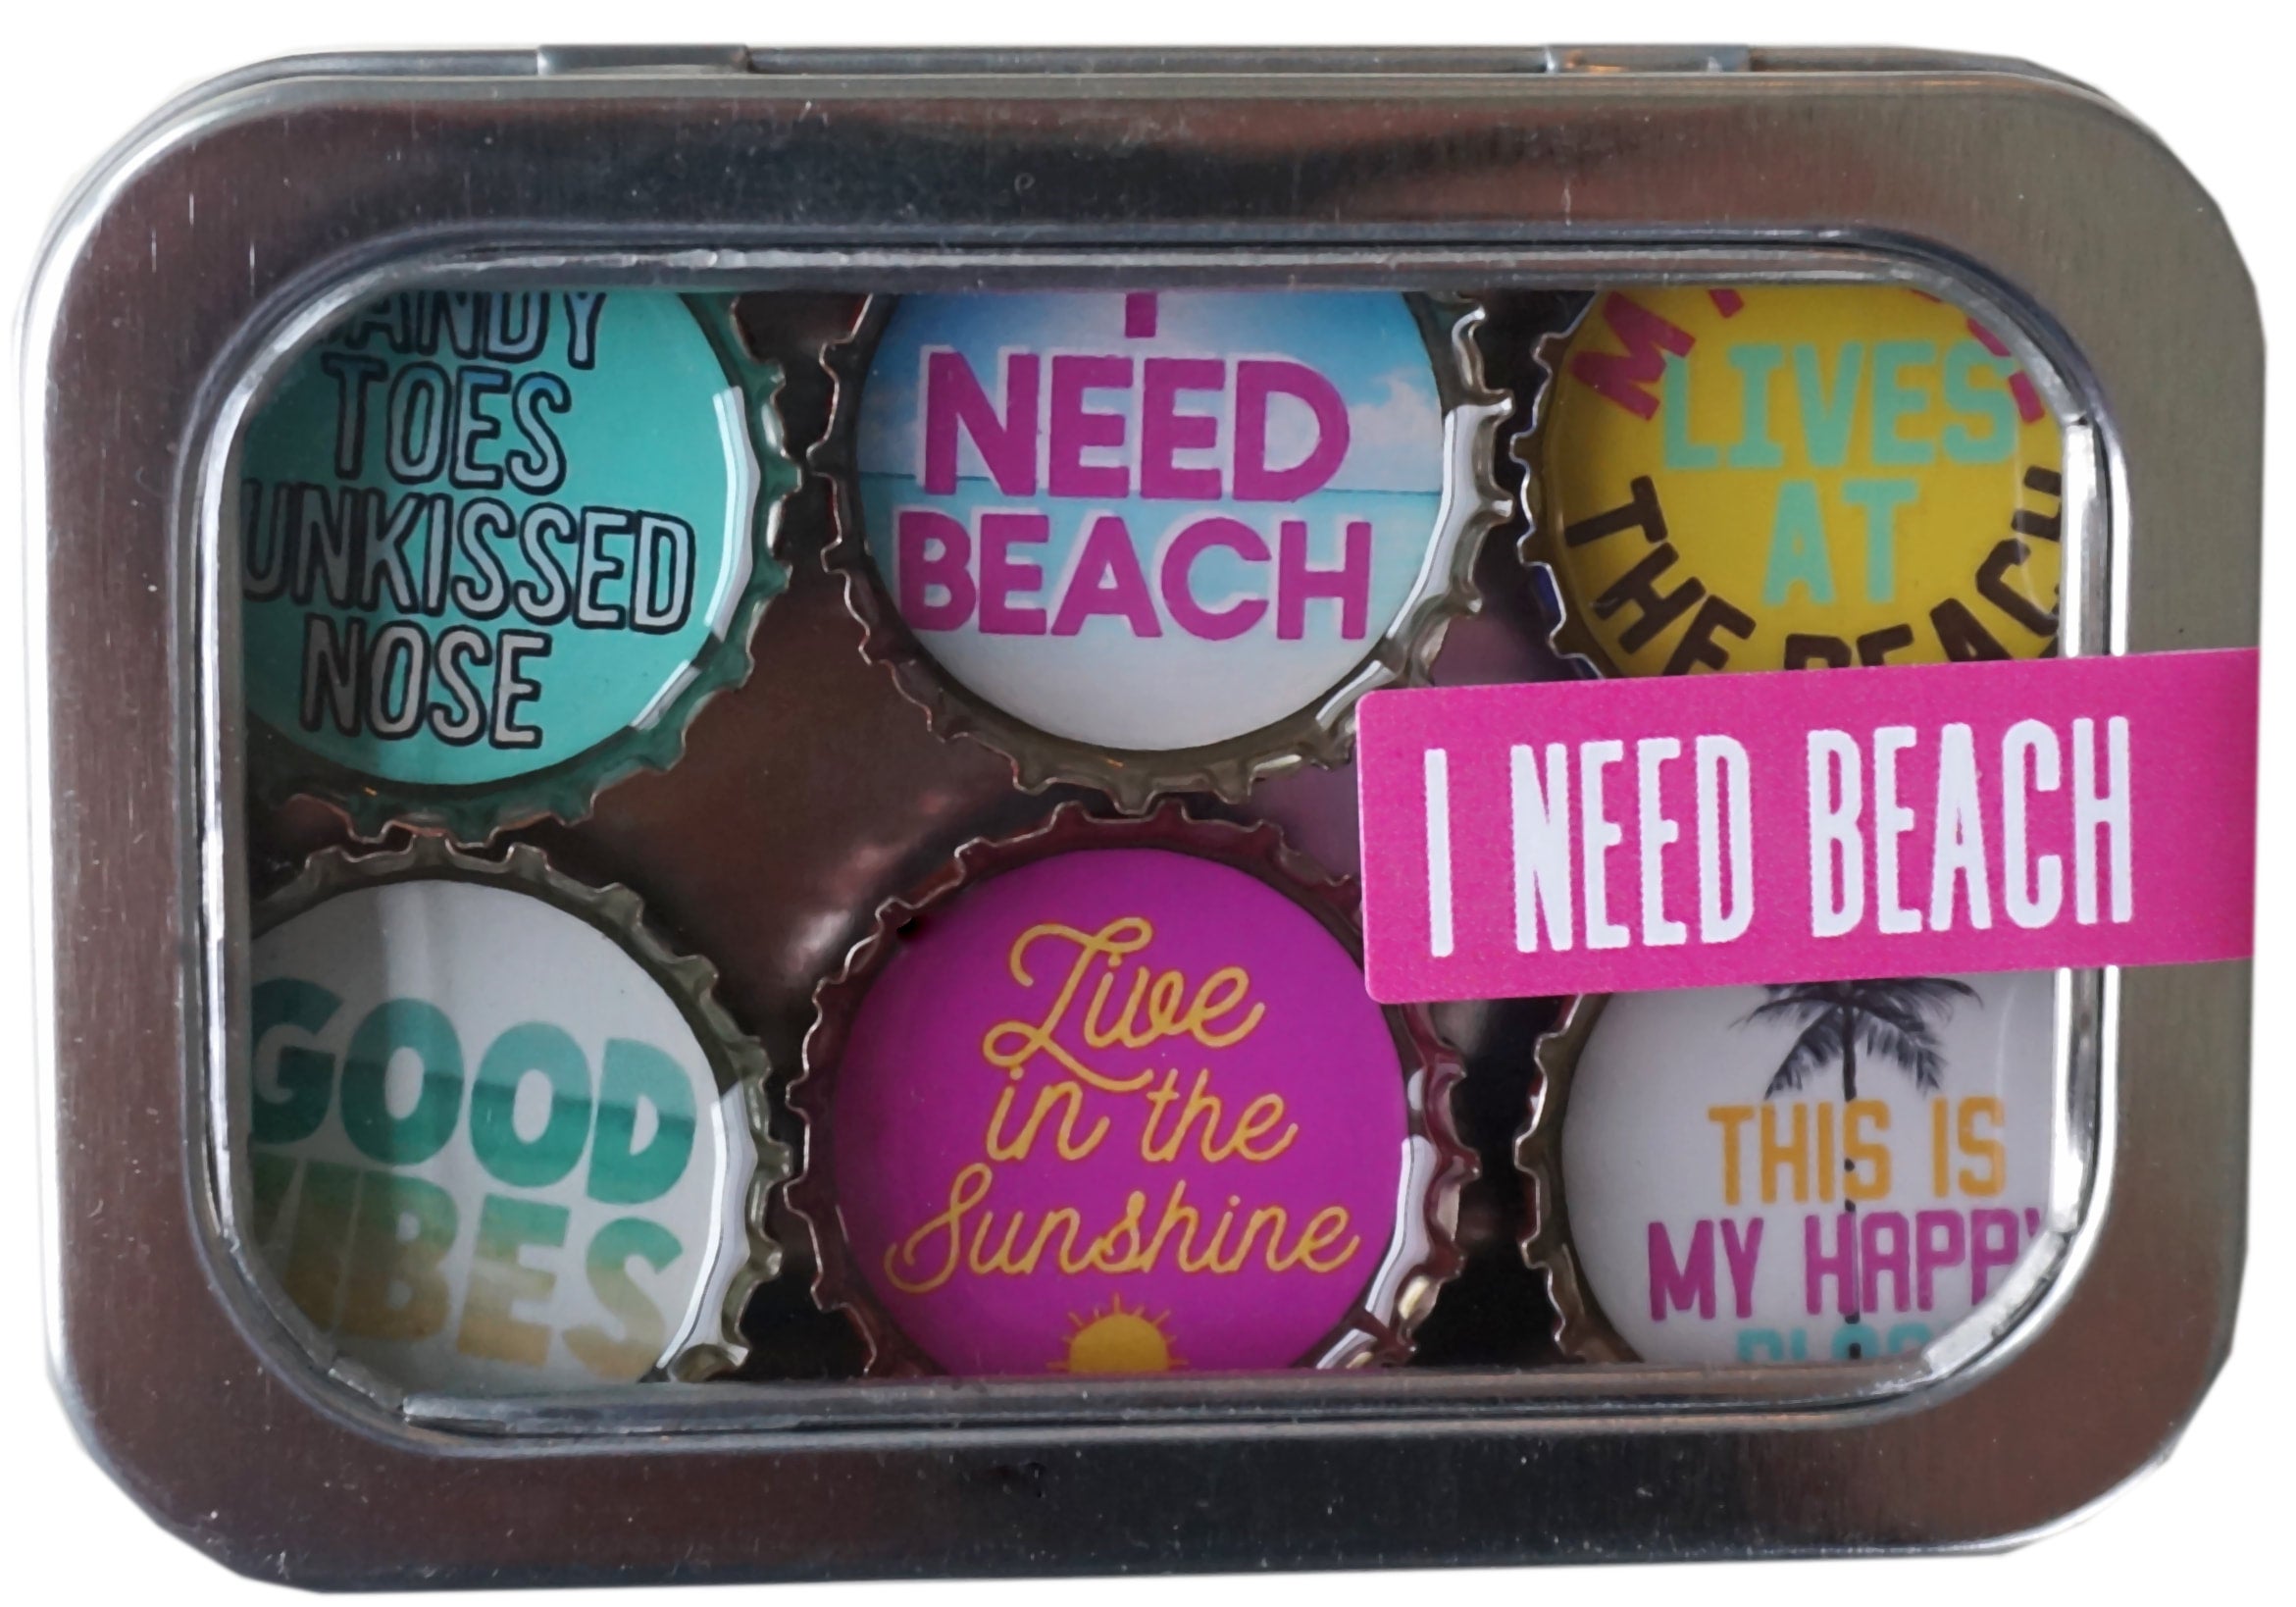 I Need Beach magnets, Beach magnet, bottle cap, gift, stocking stuffer,  upcycled, recycled, bottle caps, eco-friendly, eco friendly, woman owned,  made